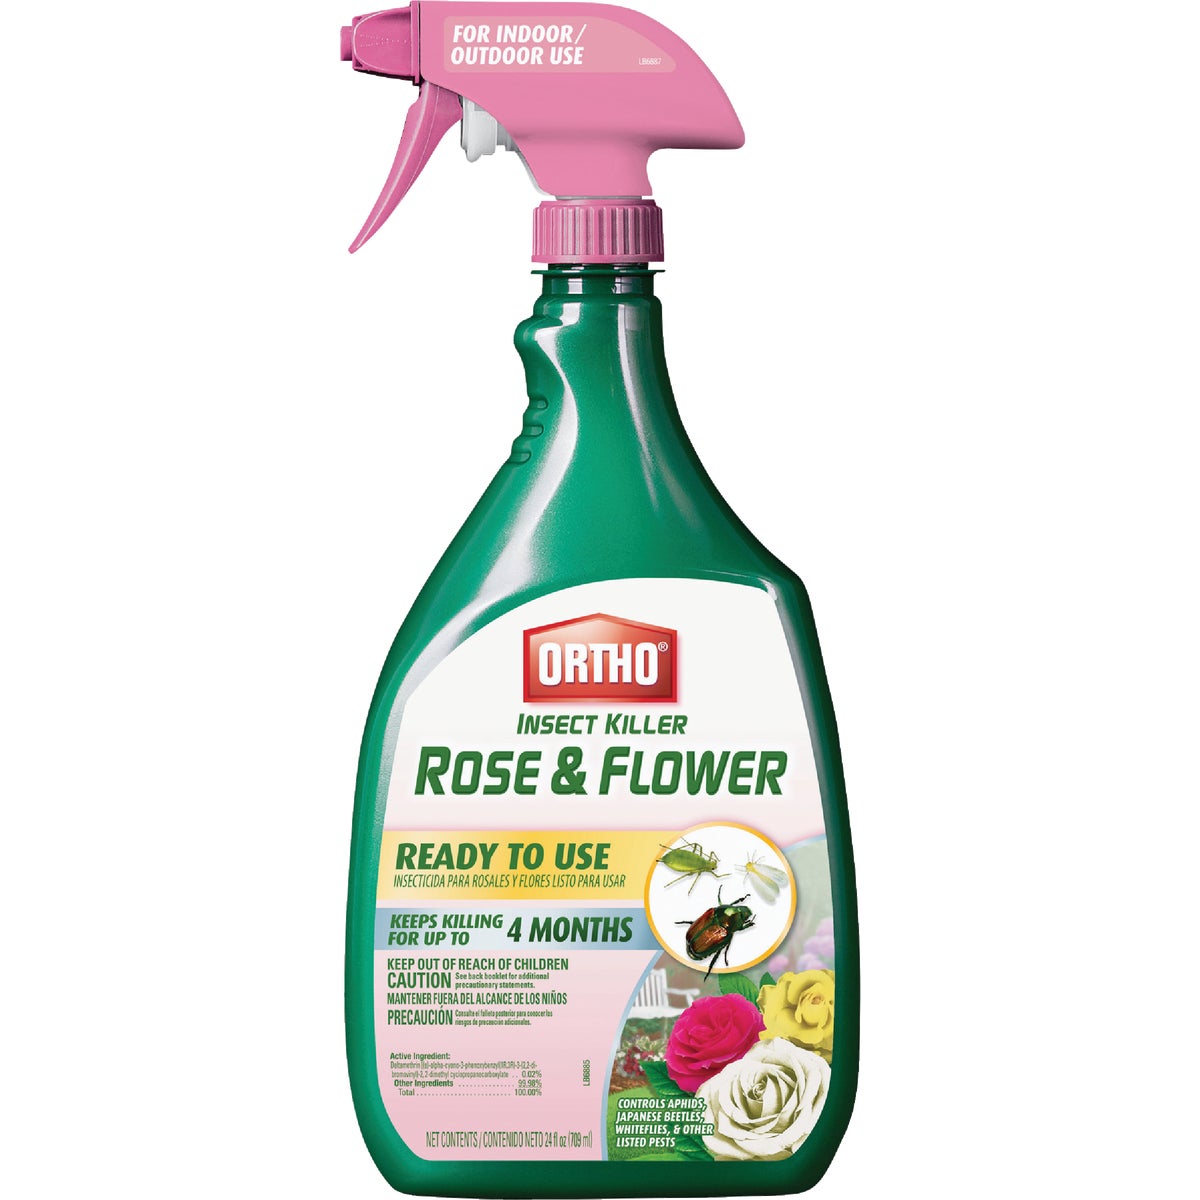 Item 709040, Ortho Rose &amp; Flower Insect Killer kills over 100 listed insects fast.